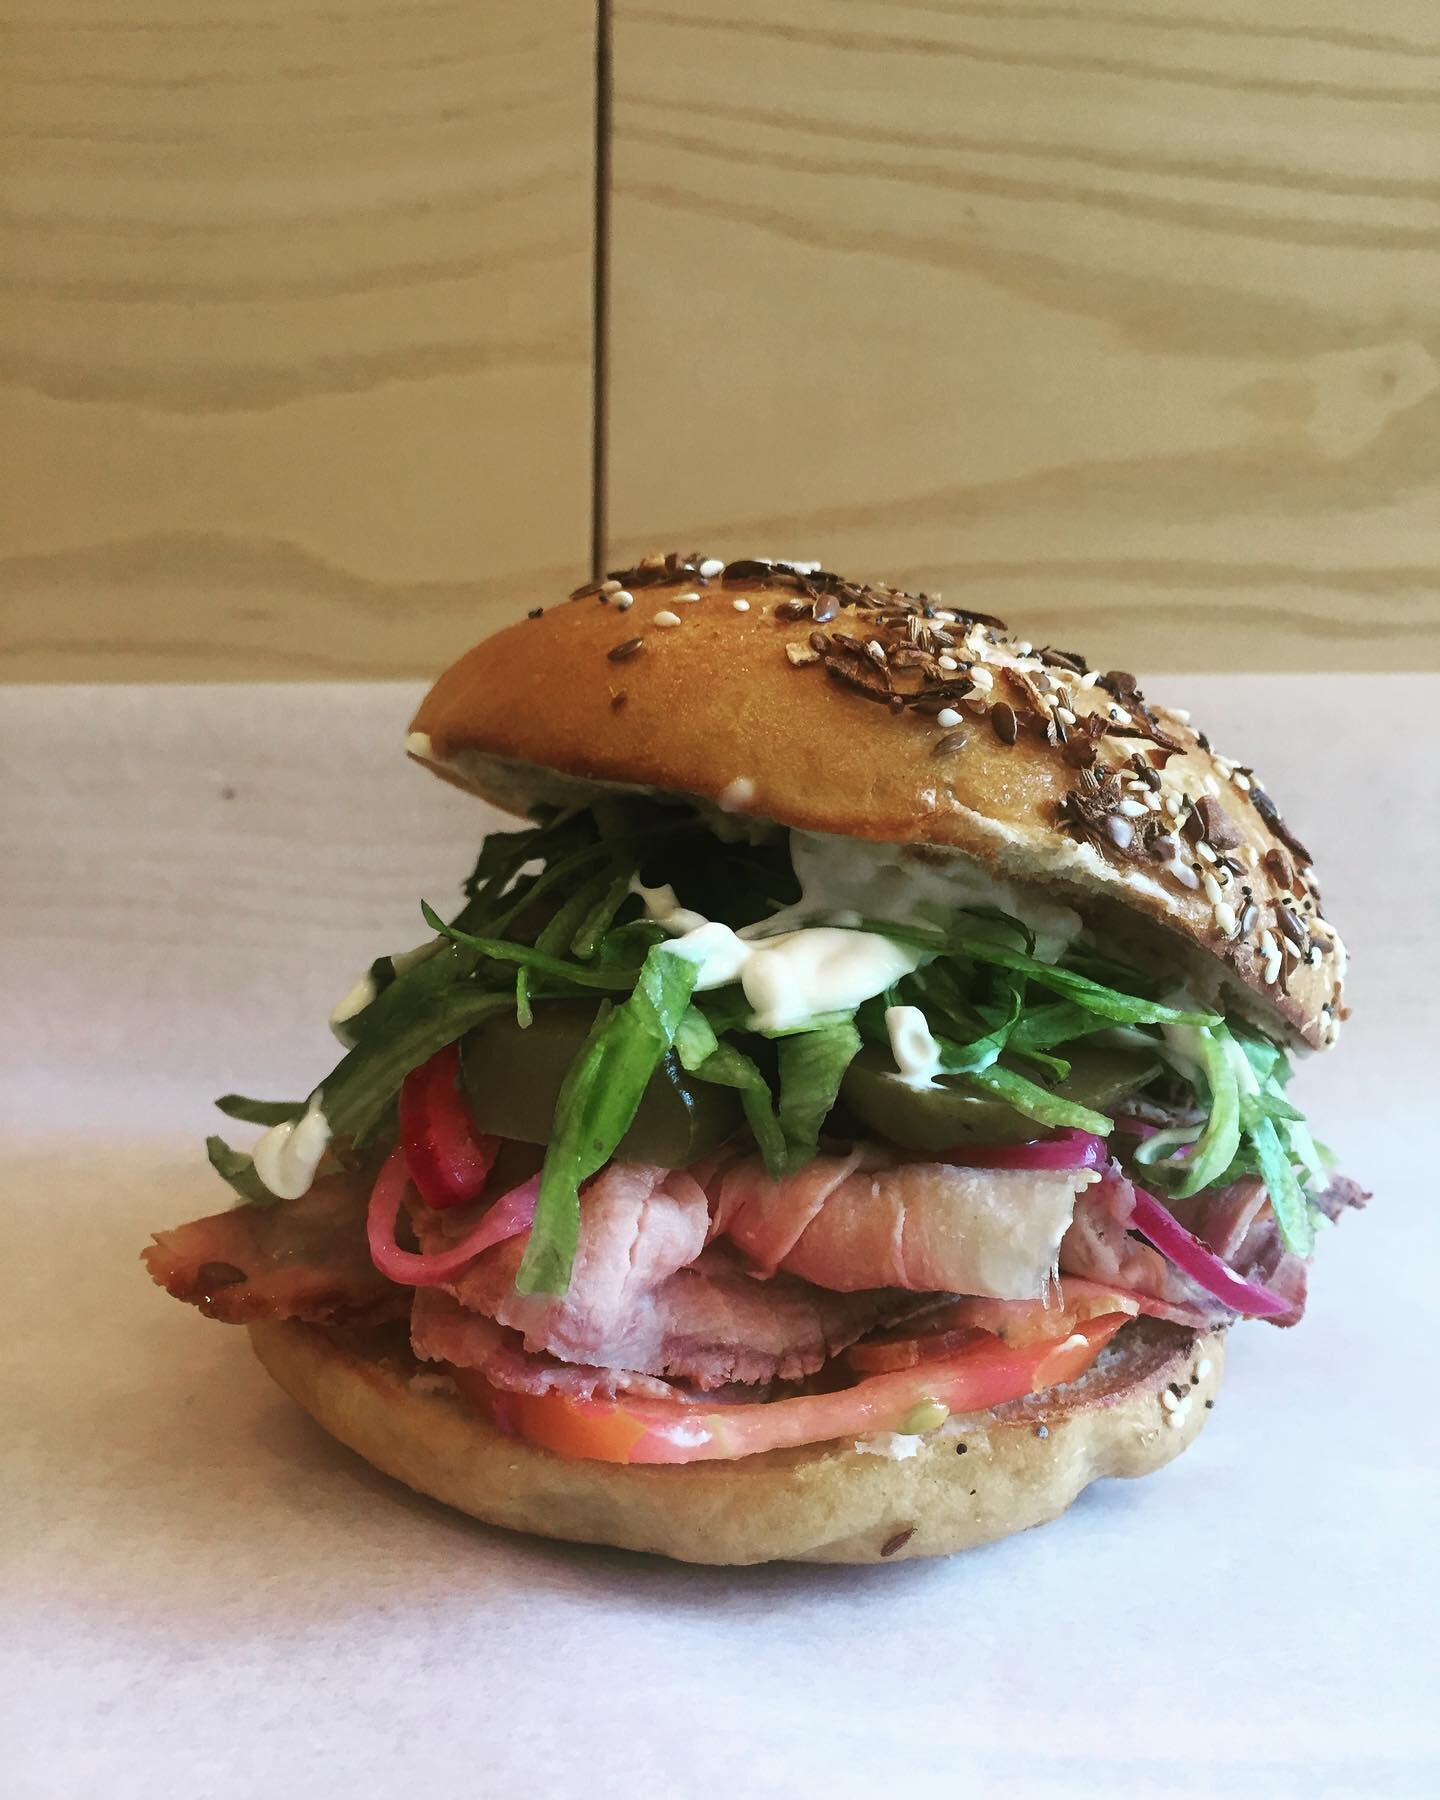 Here at Max we&rsquo;re not always looking to reinvent the (bread) wheel but to deliver classic flavour combos using the freshest ingredients. Our newest member to the menu is a case in point. A simple classic. Roast beef, tomato, lettuce, mixed pick